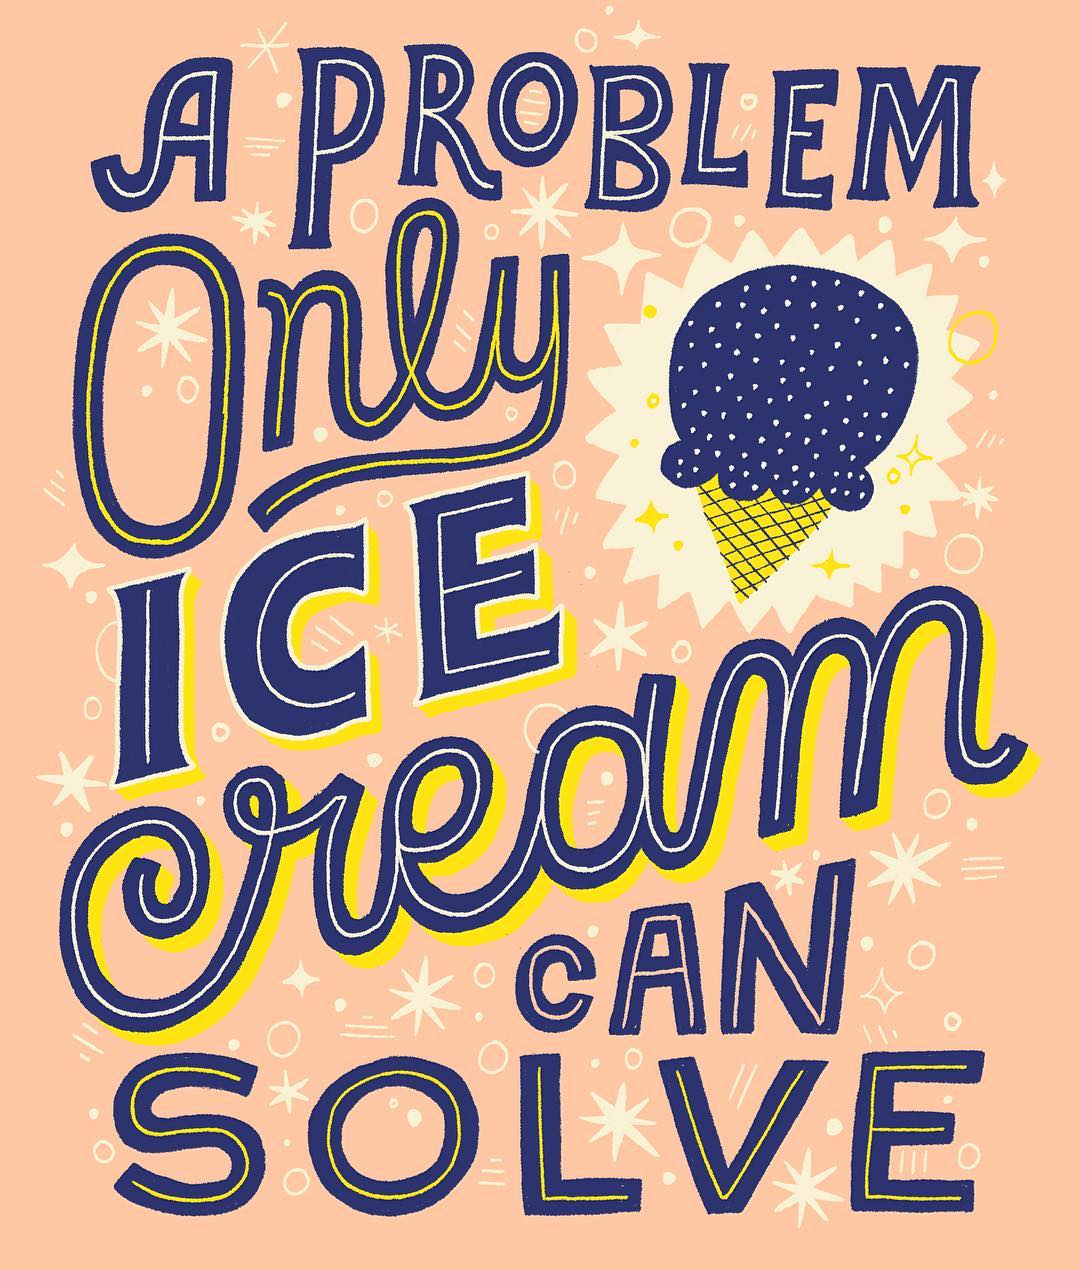 "A problem only ice cream can solve" by Mary Kate McDevitt  | 10 consejos para crear imágenes con citas | mlmonferrer.es